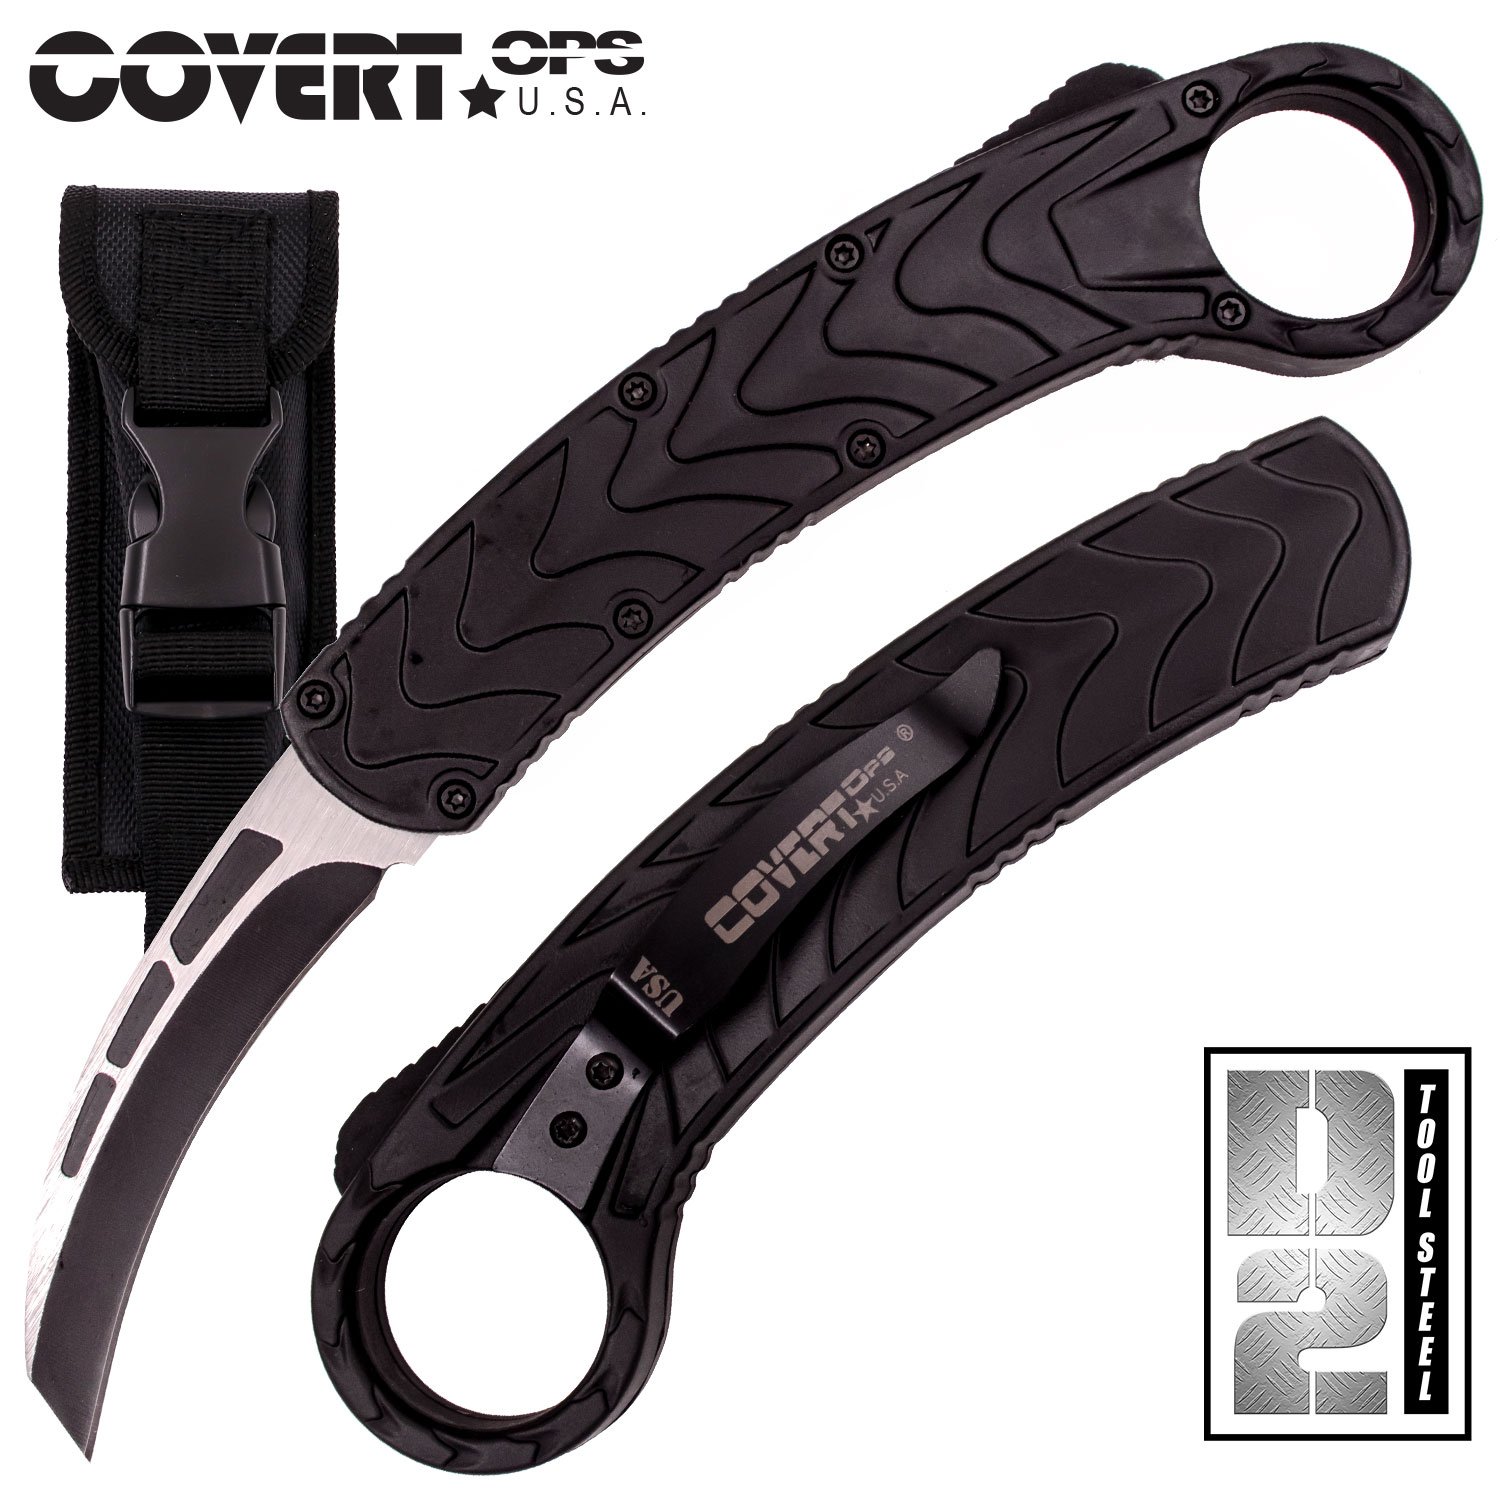 Covert OPS USA OTF Automatic Knife 8 inch Overall D2 Steel Blade Karambit